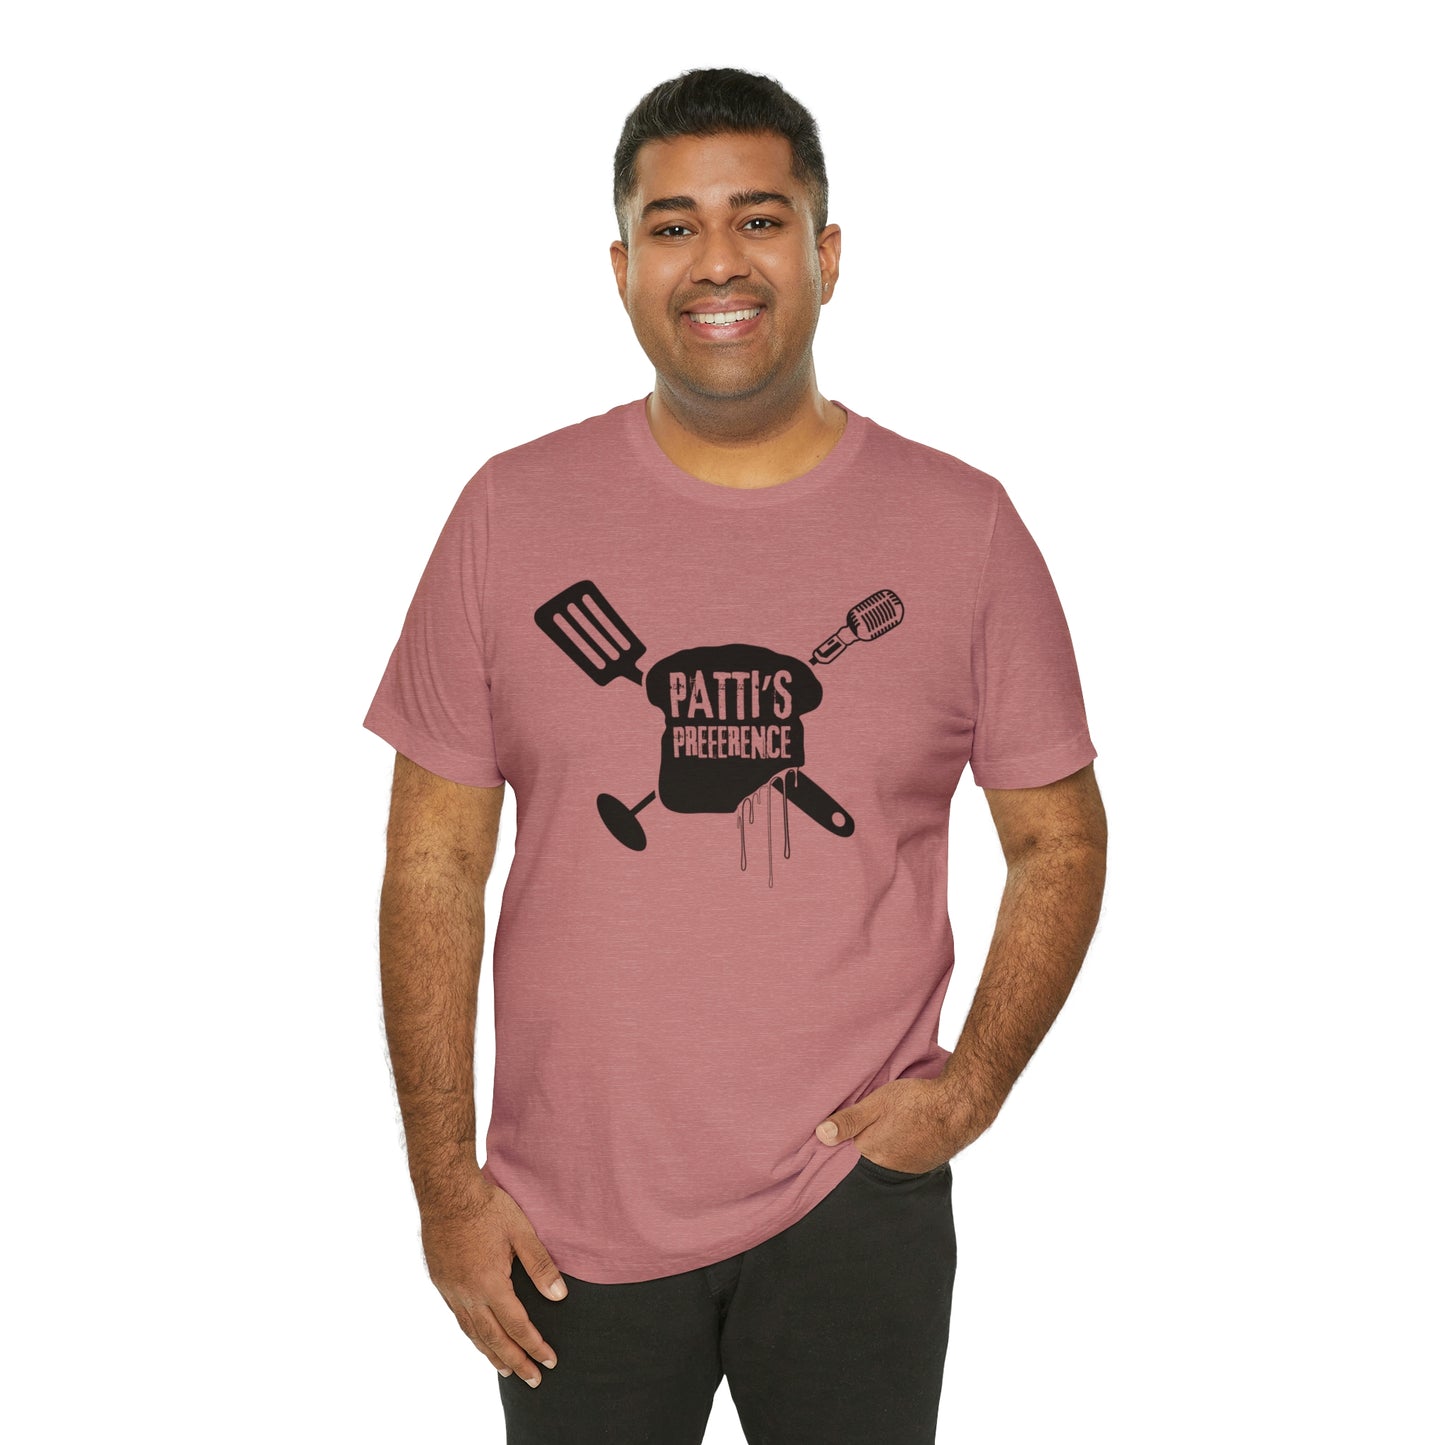 Pattis Preference Official Unisex Tshirt